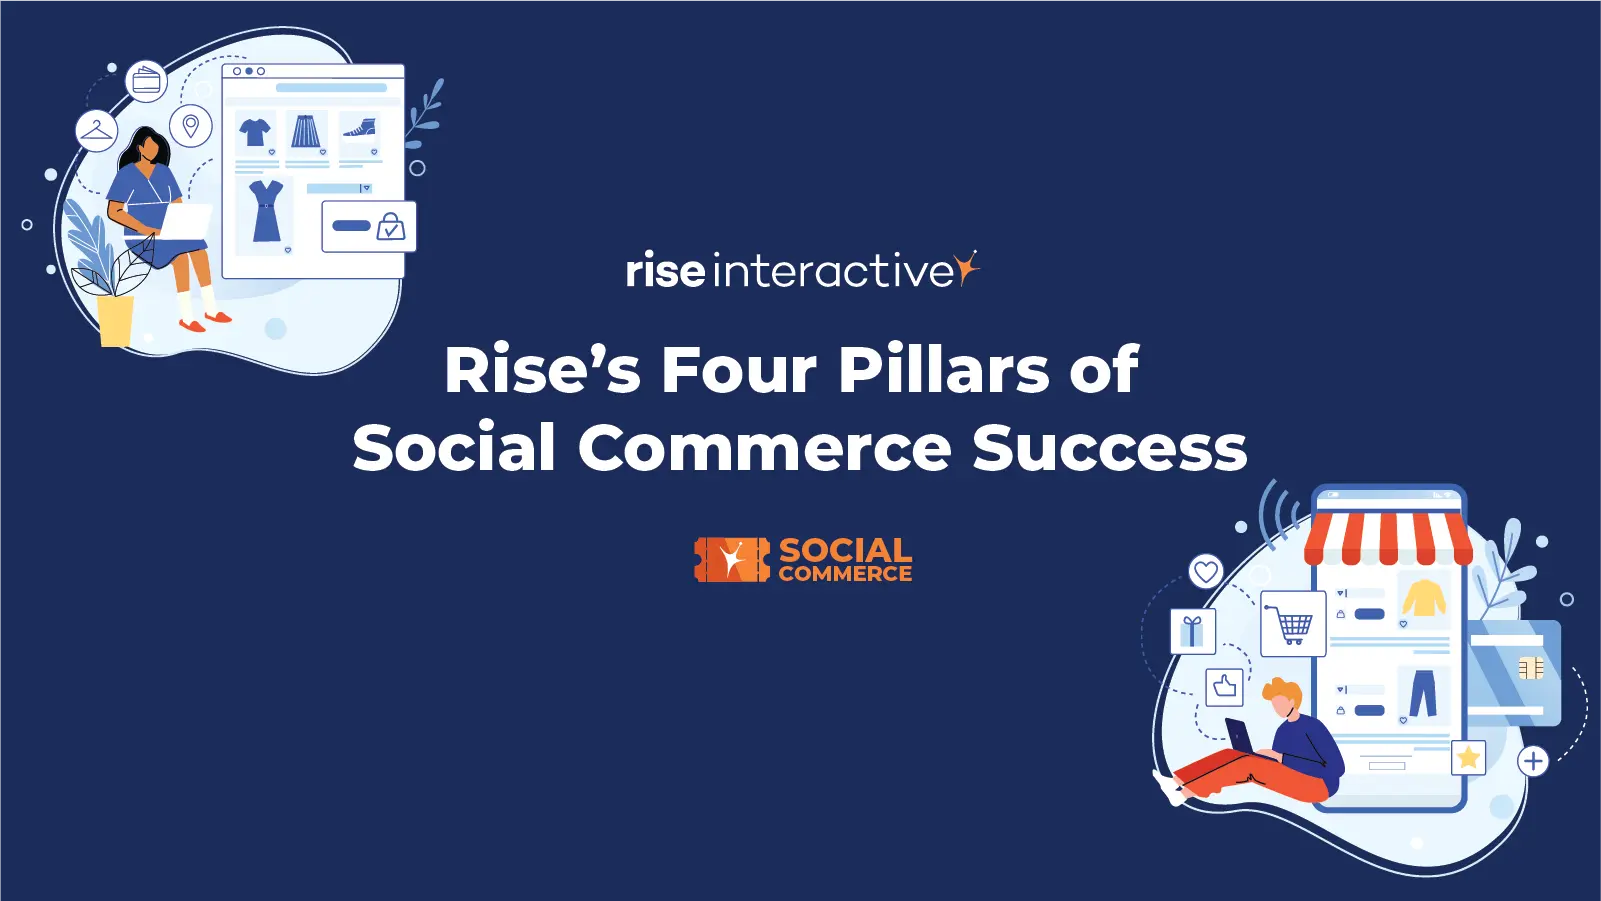 Rise's Four Pillars of Social Commerce Success on Navy Blue Background Graphic